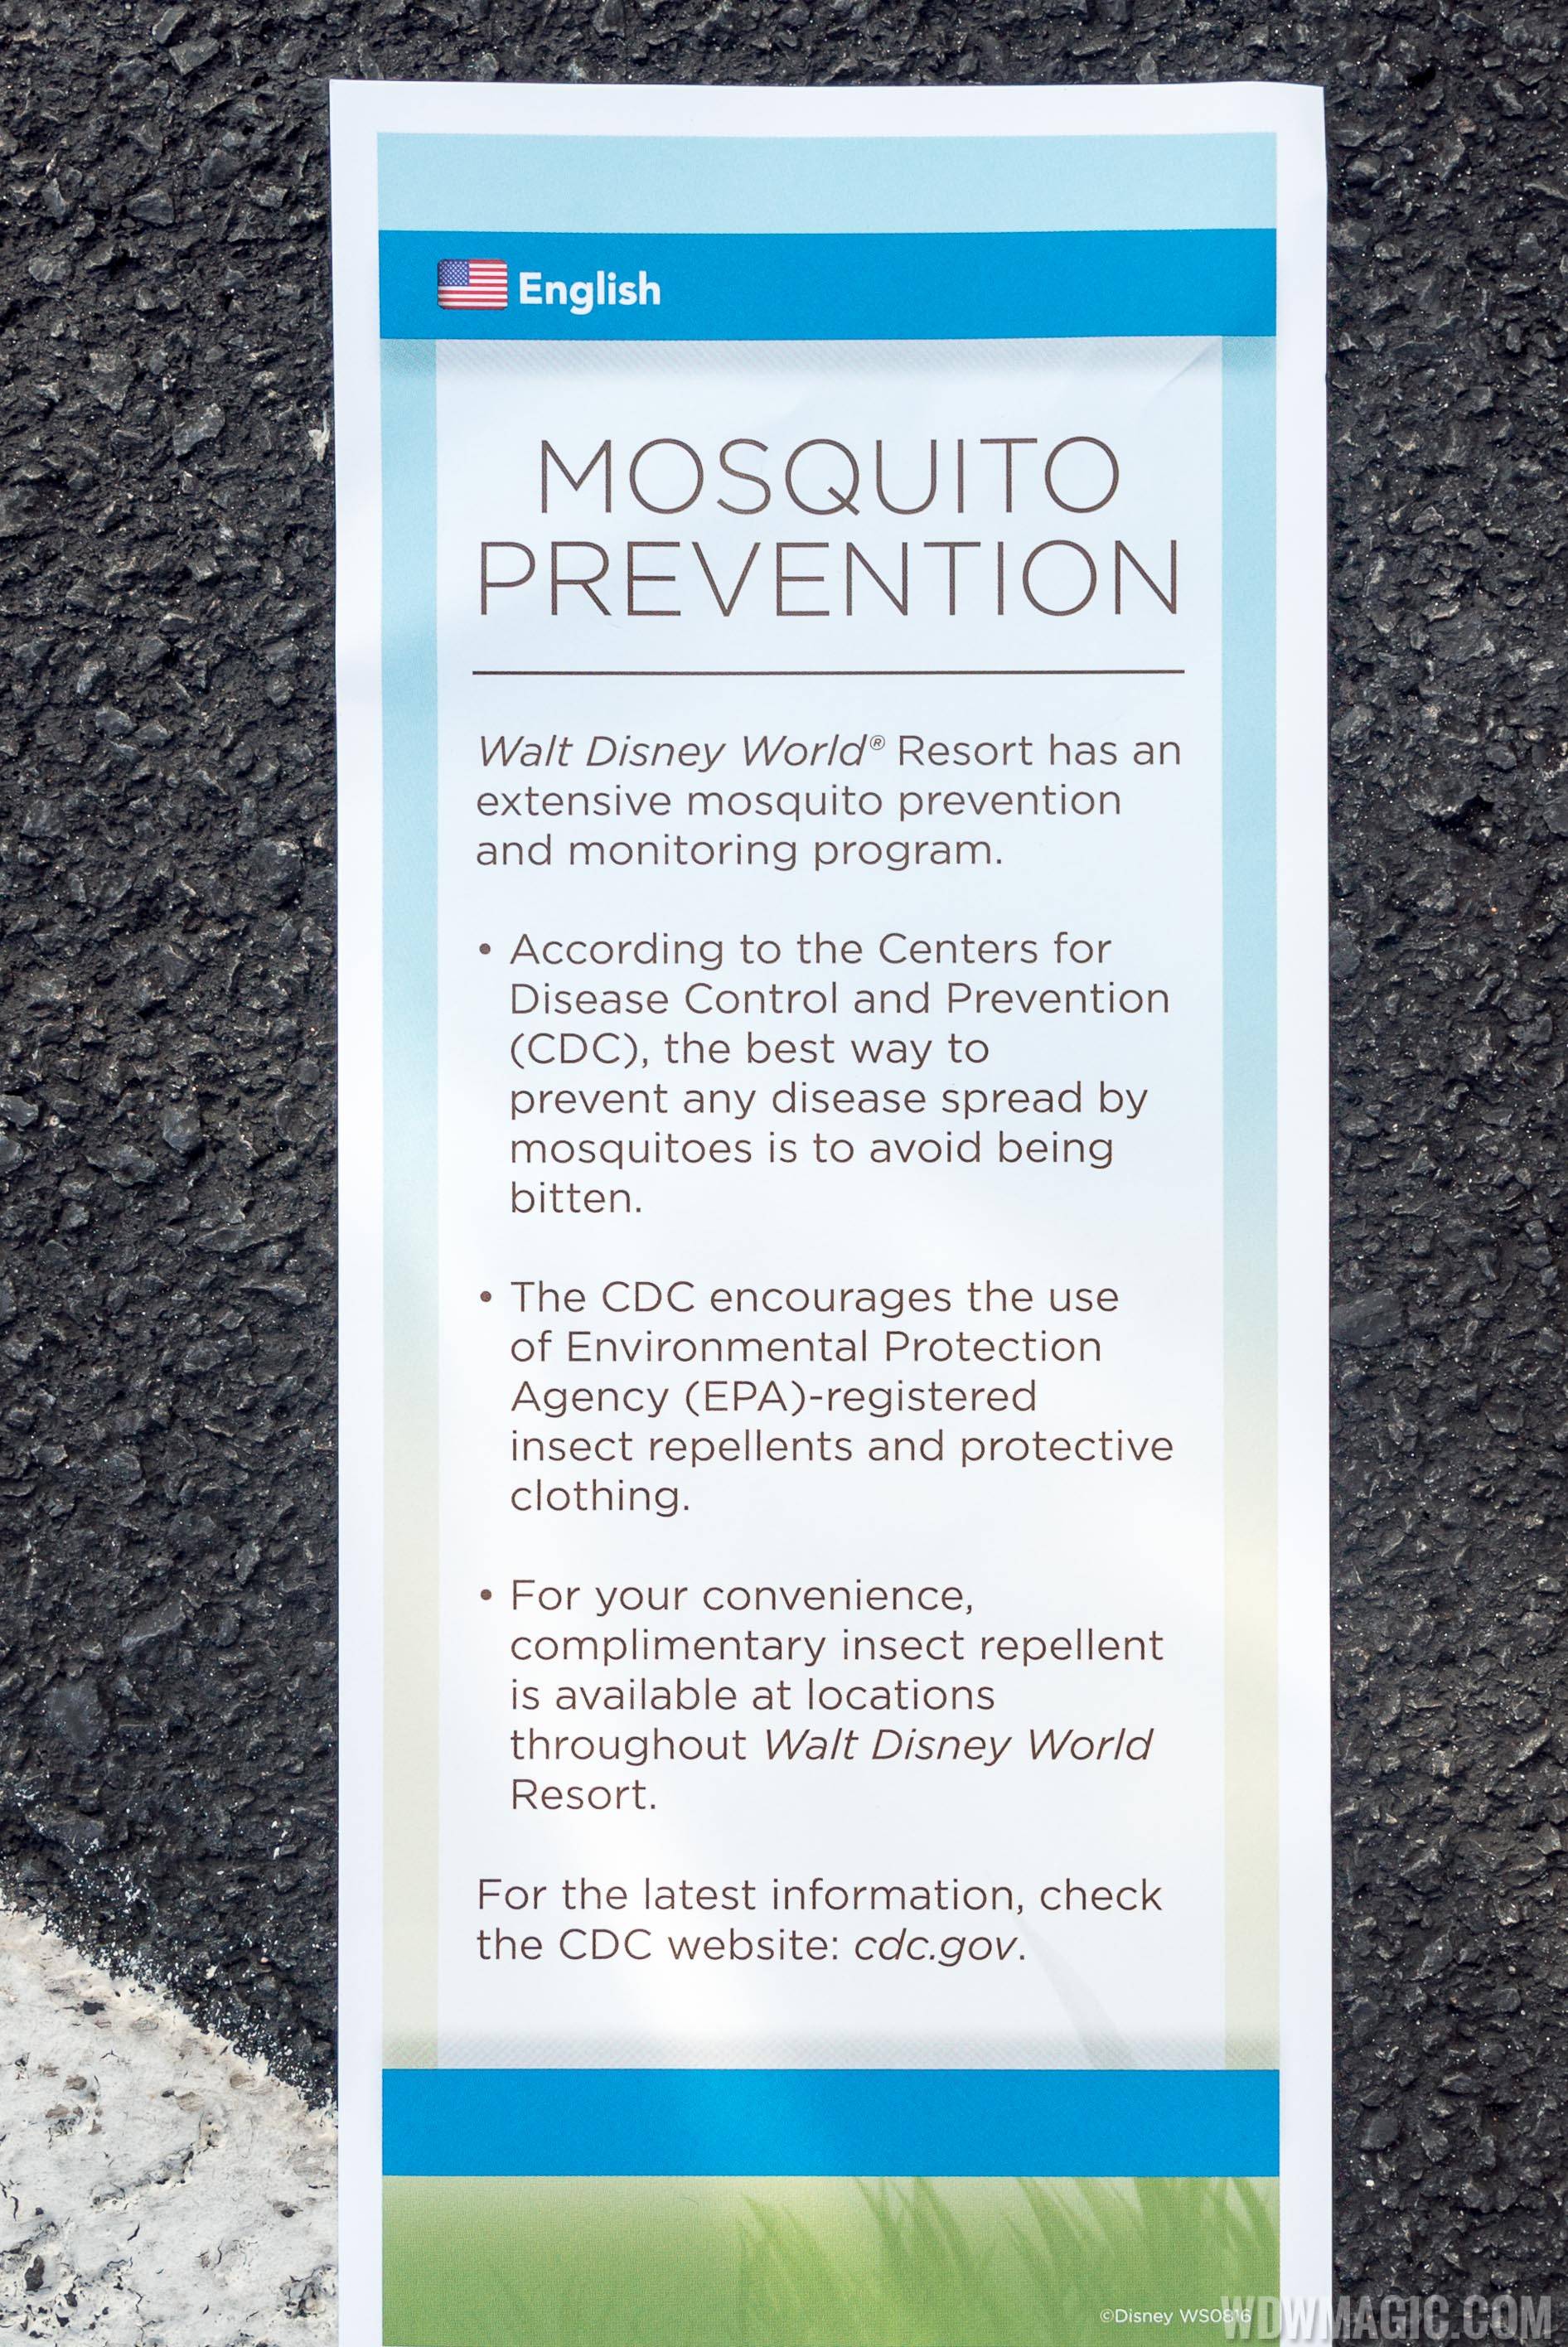 Mosquito control flyer given to guests at Walt Disney World